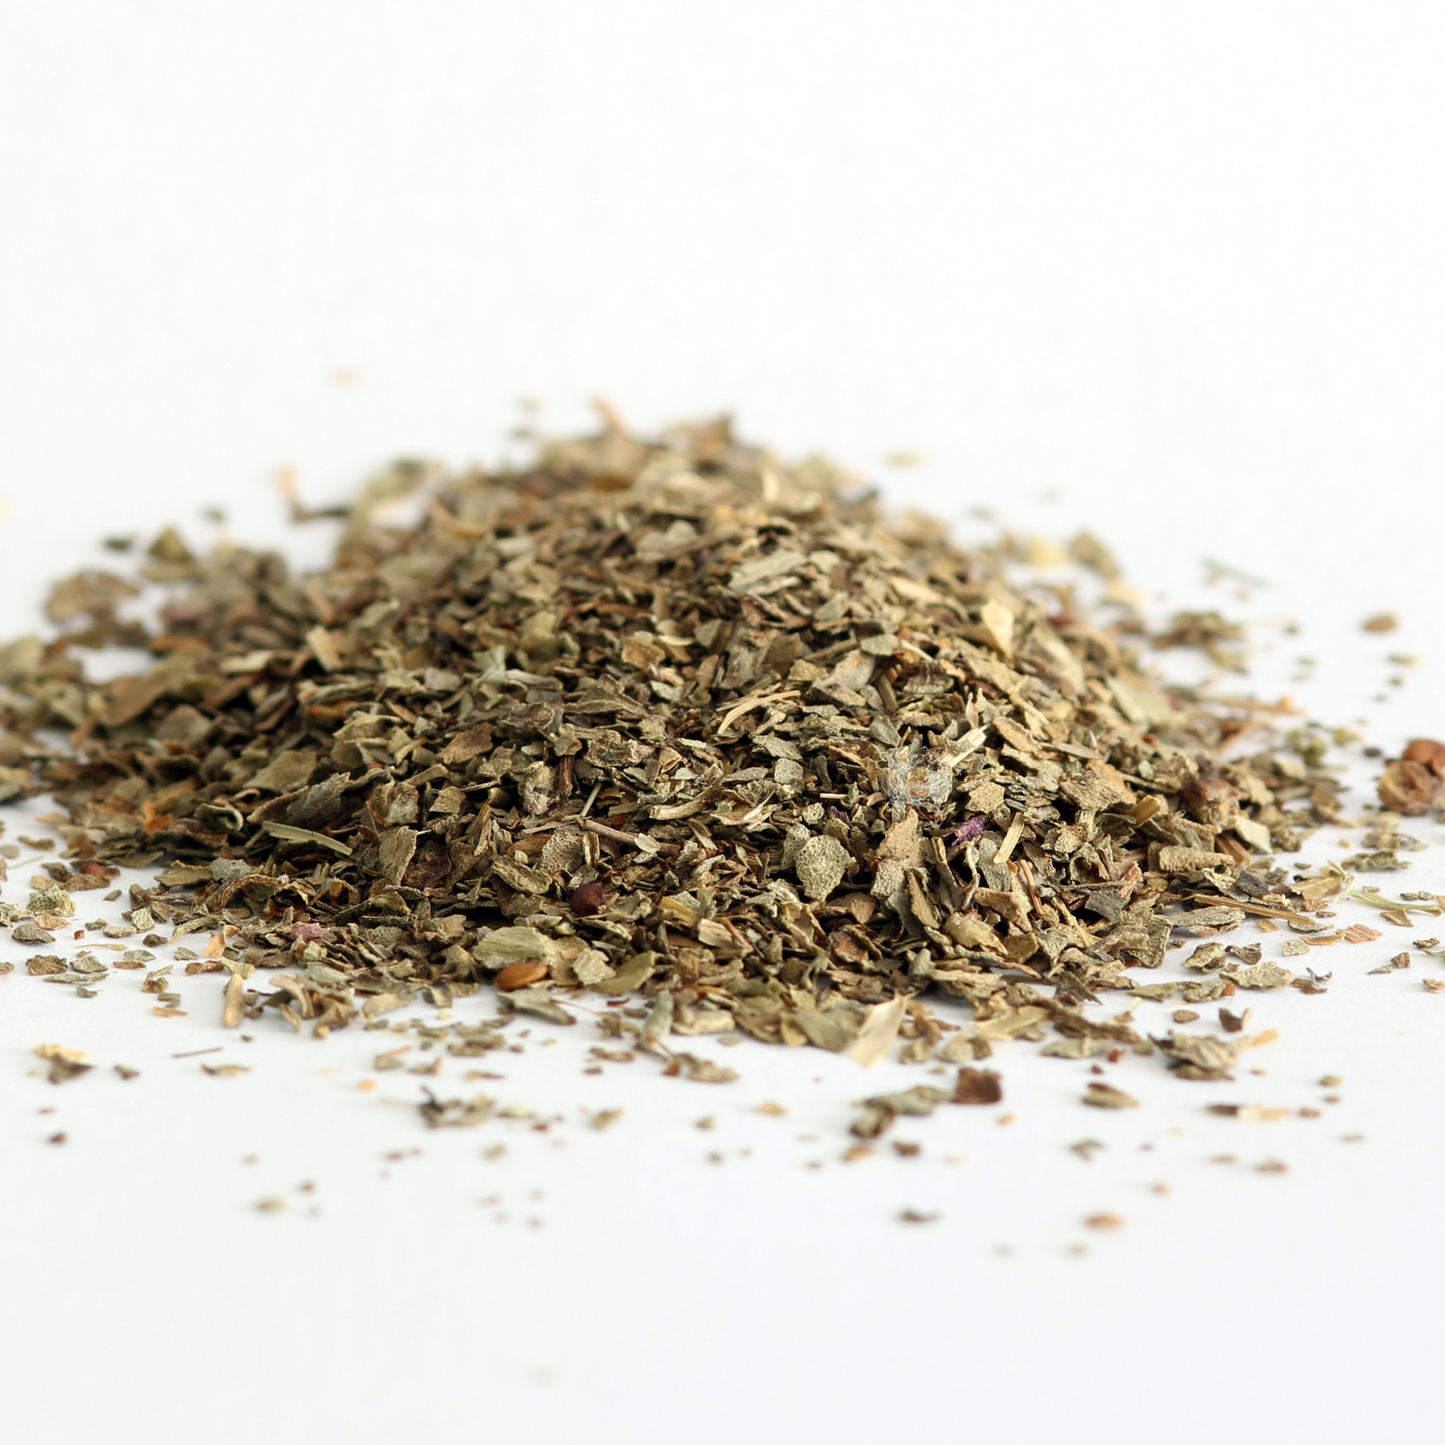 Holy Basil Herb, Dried Herbs, Food Grade Herbs, Herbs and Spices, Loose Leaf Herbs